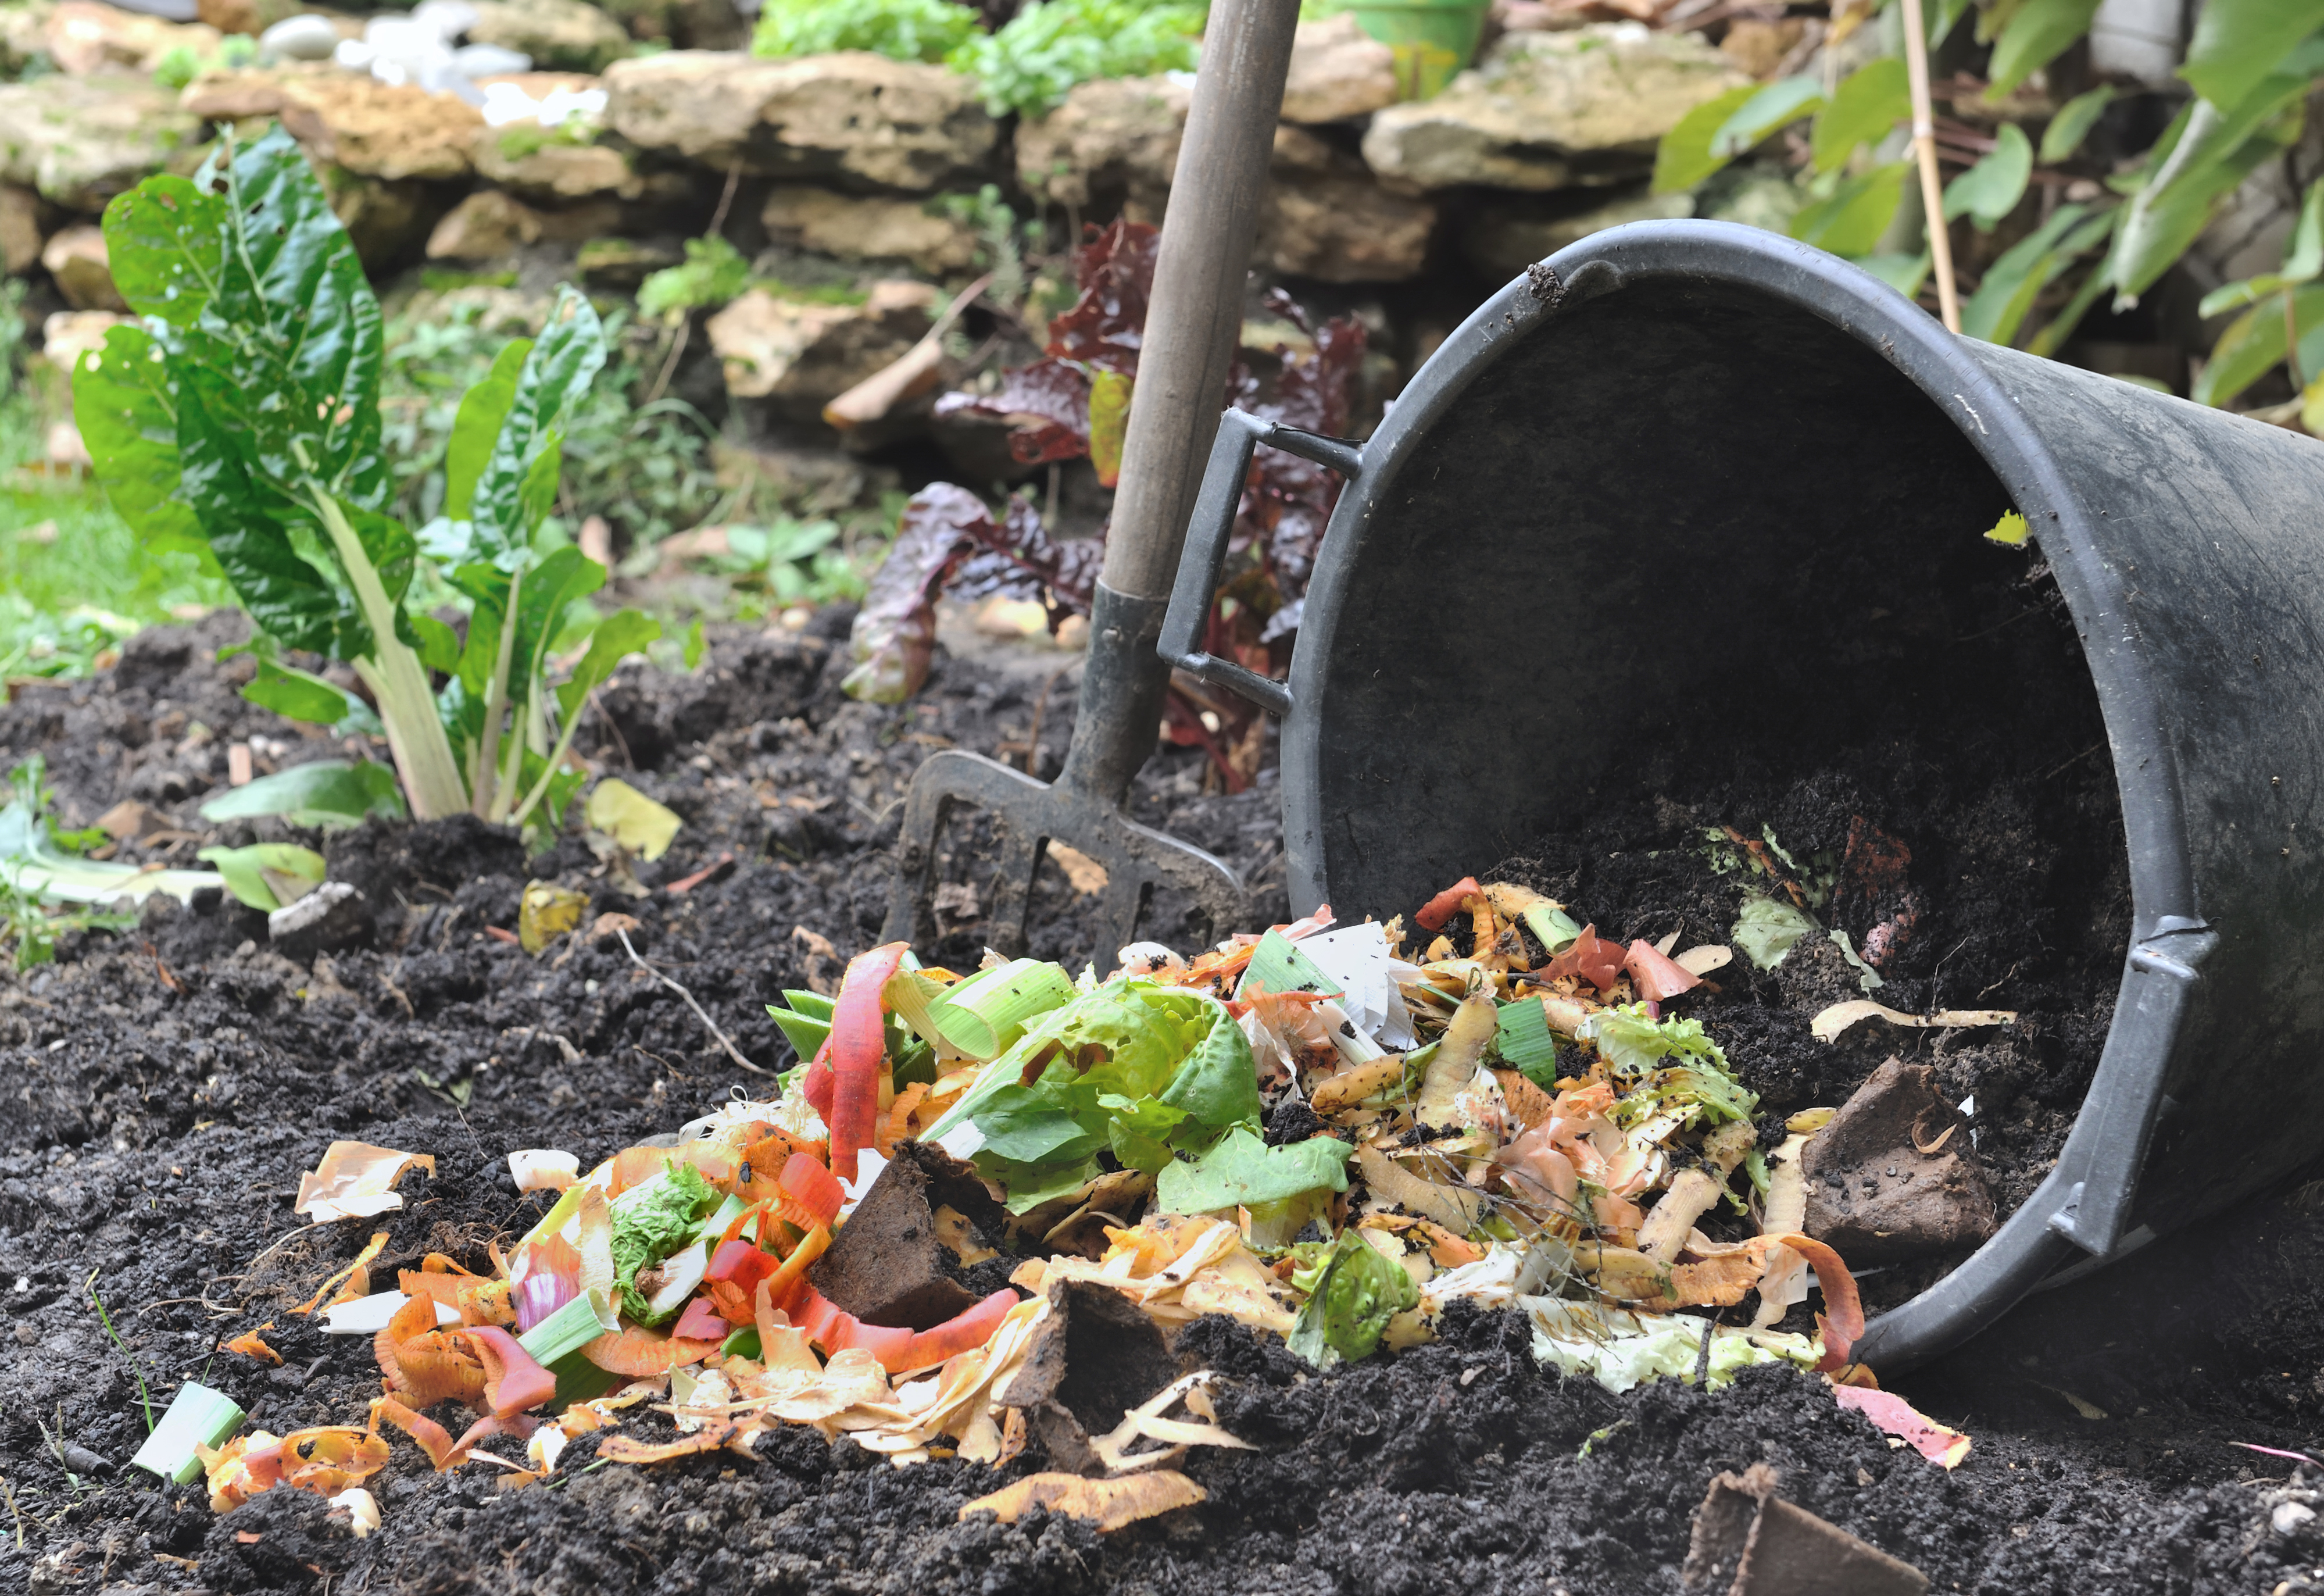 A black bucket with food scraps spilling out onto a garden bed with a pitchfork and chard plant beside it